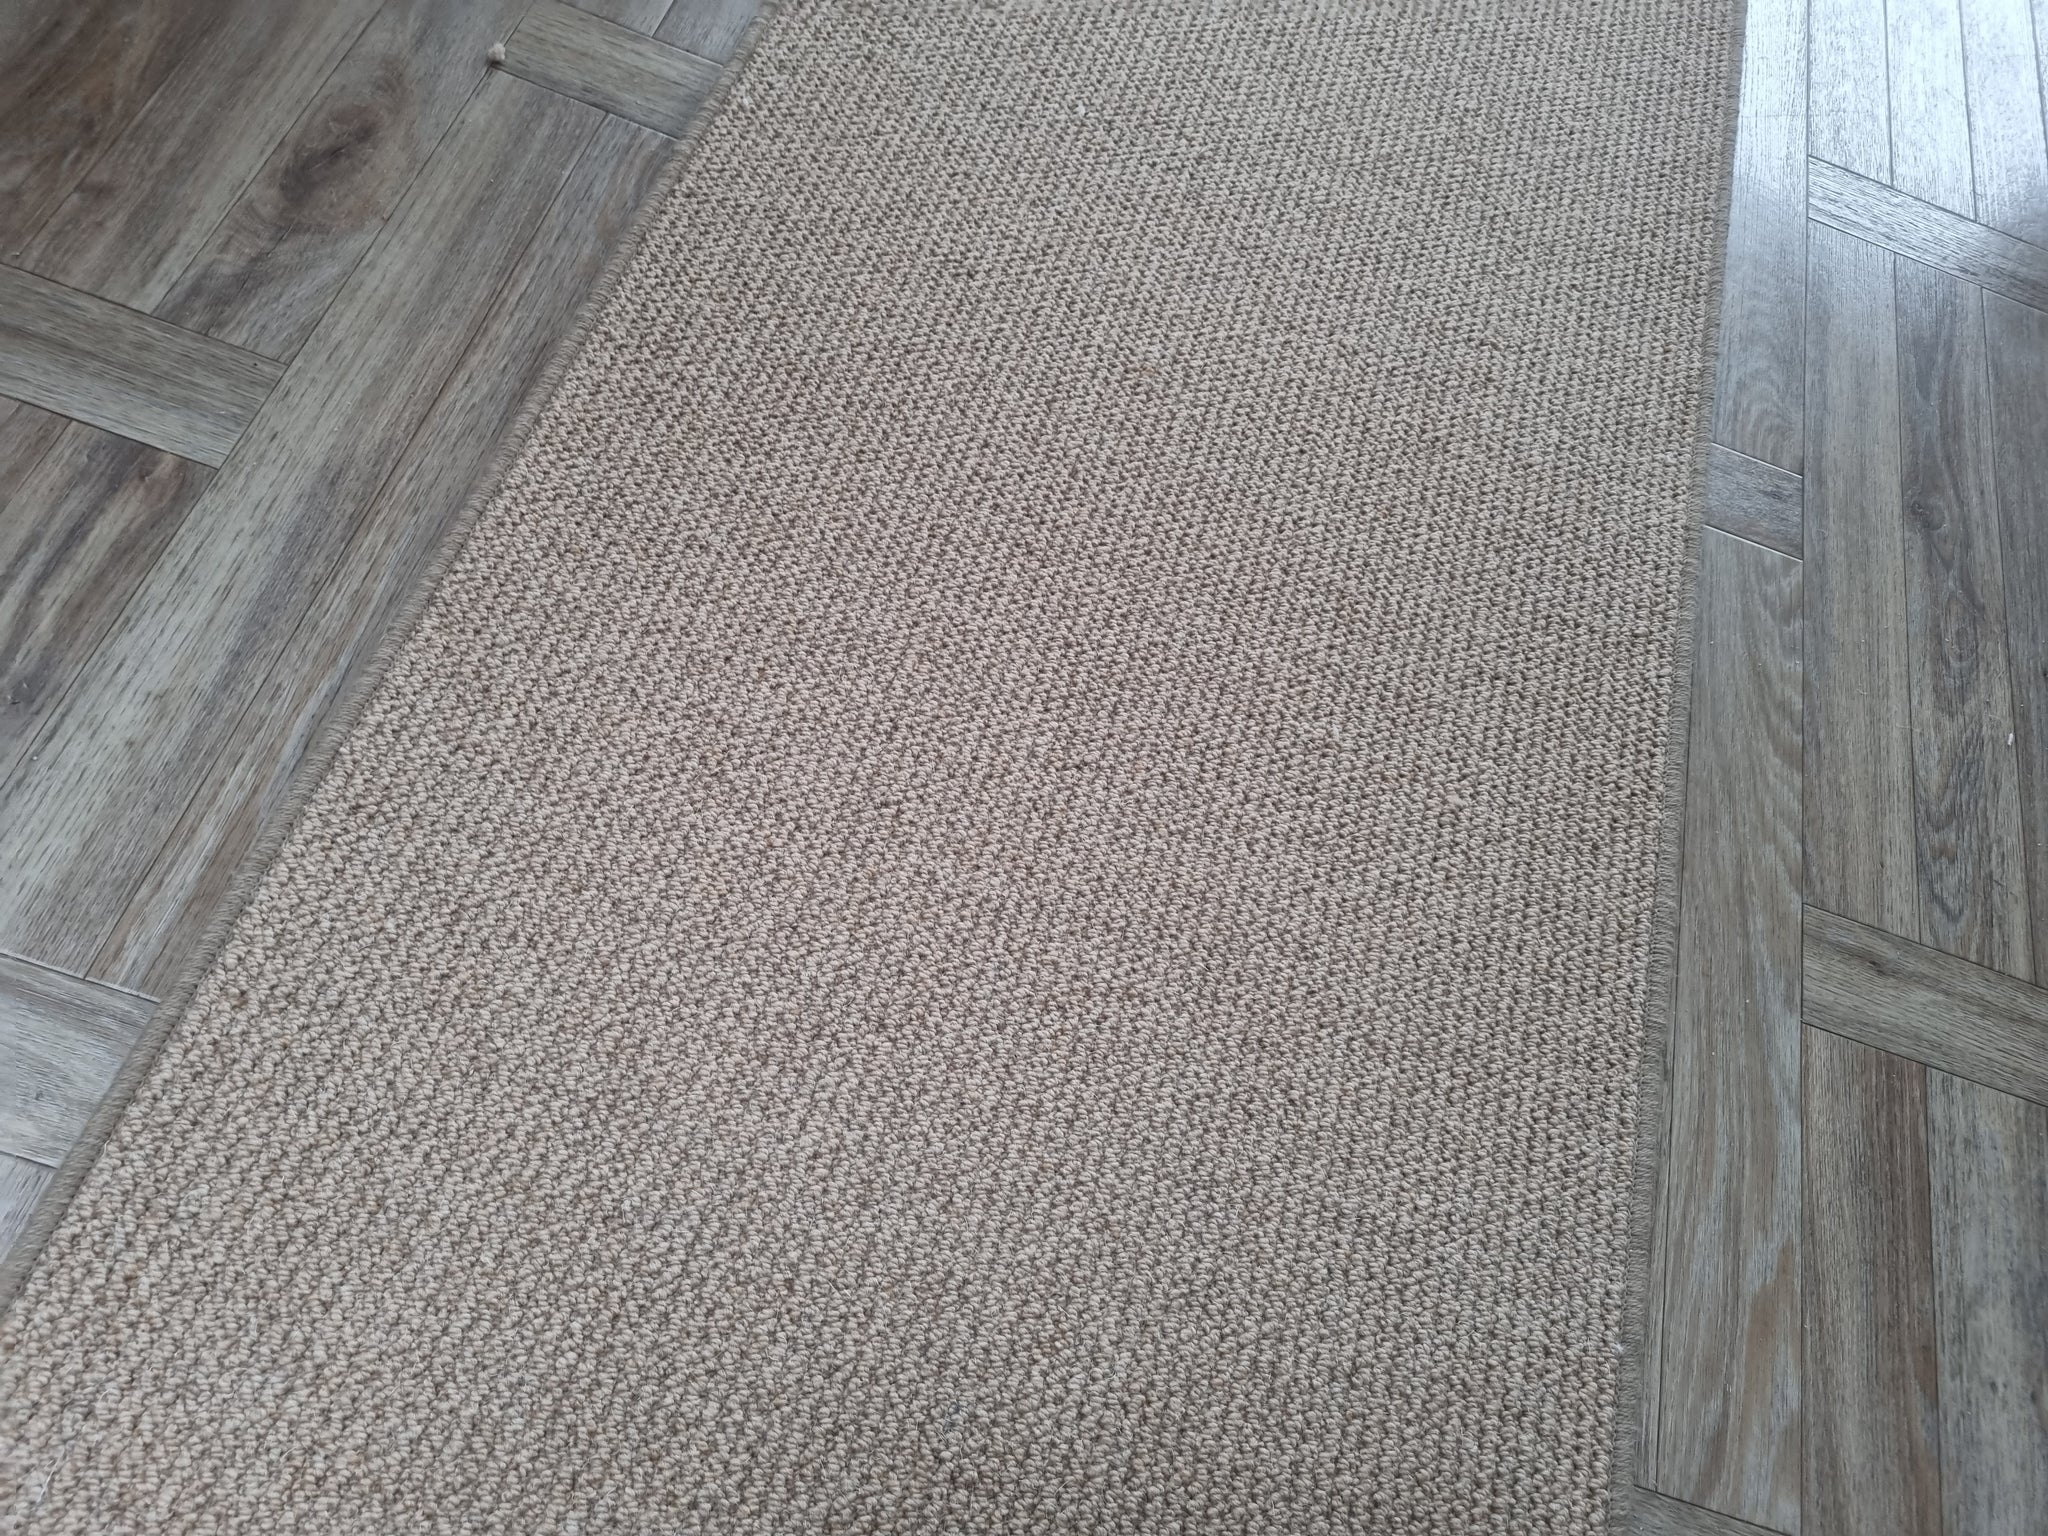 Cormar Malabar Timber 100% wool beige natural stair and floor runner whipped edges